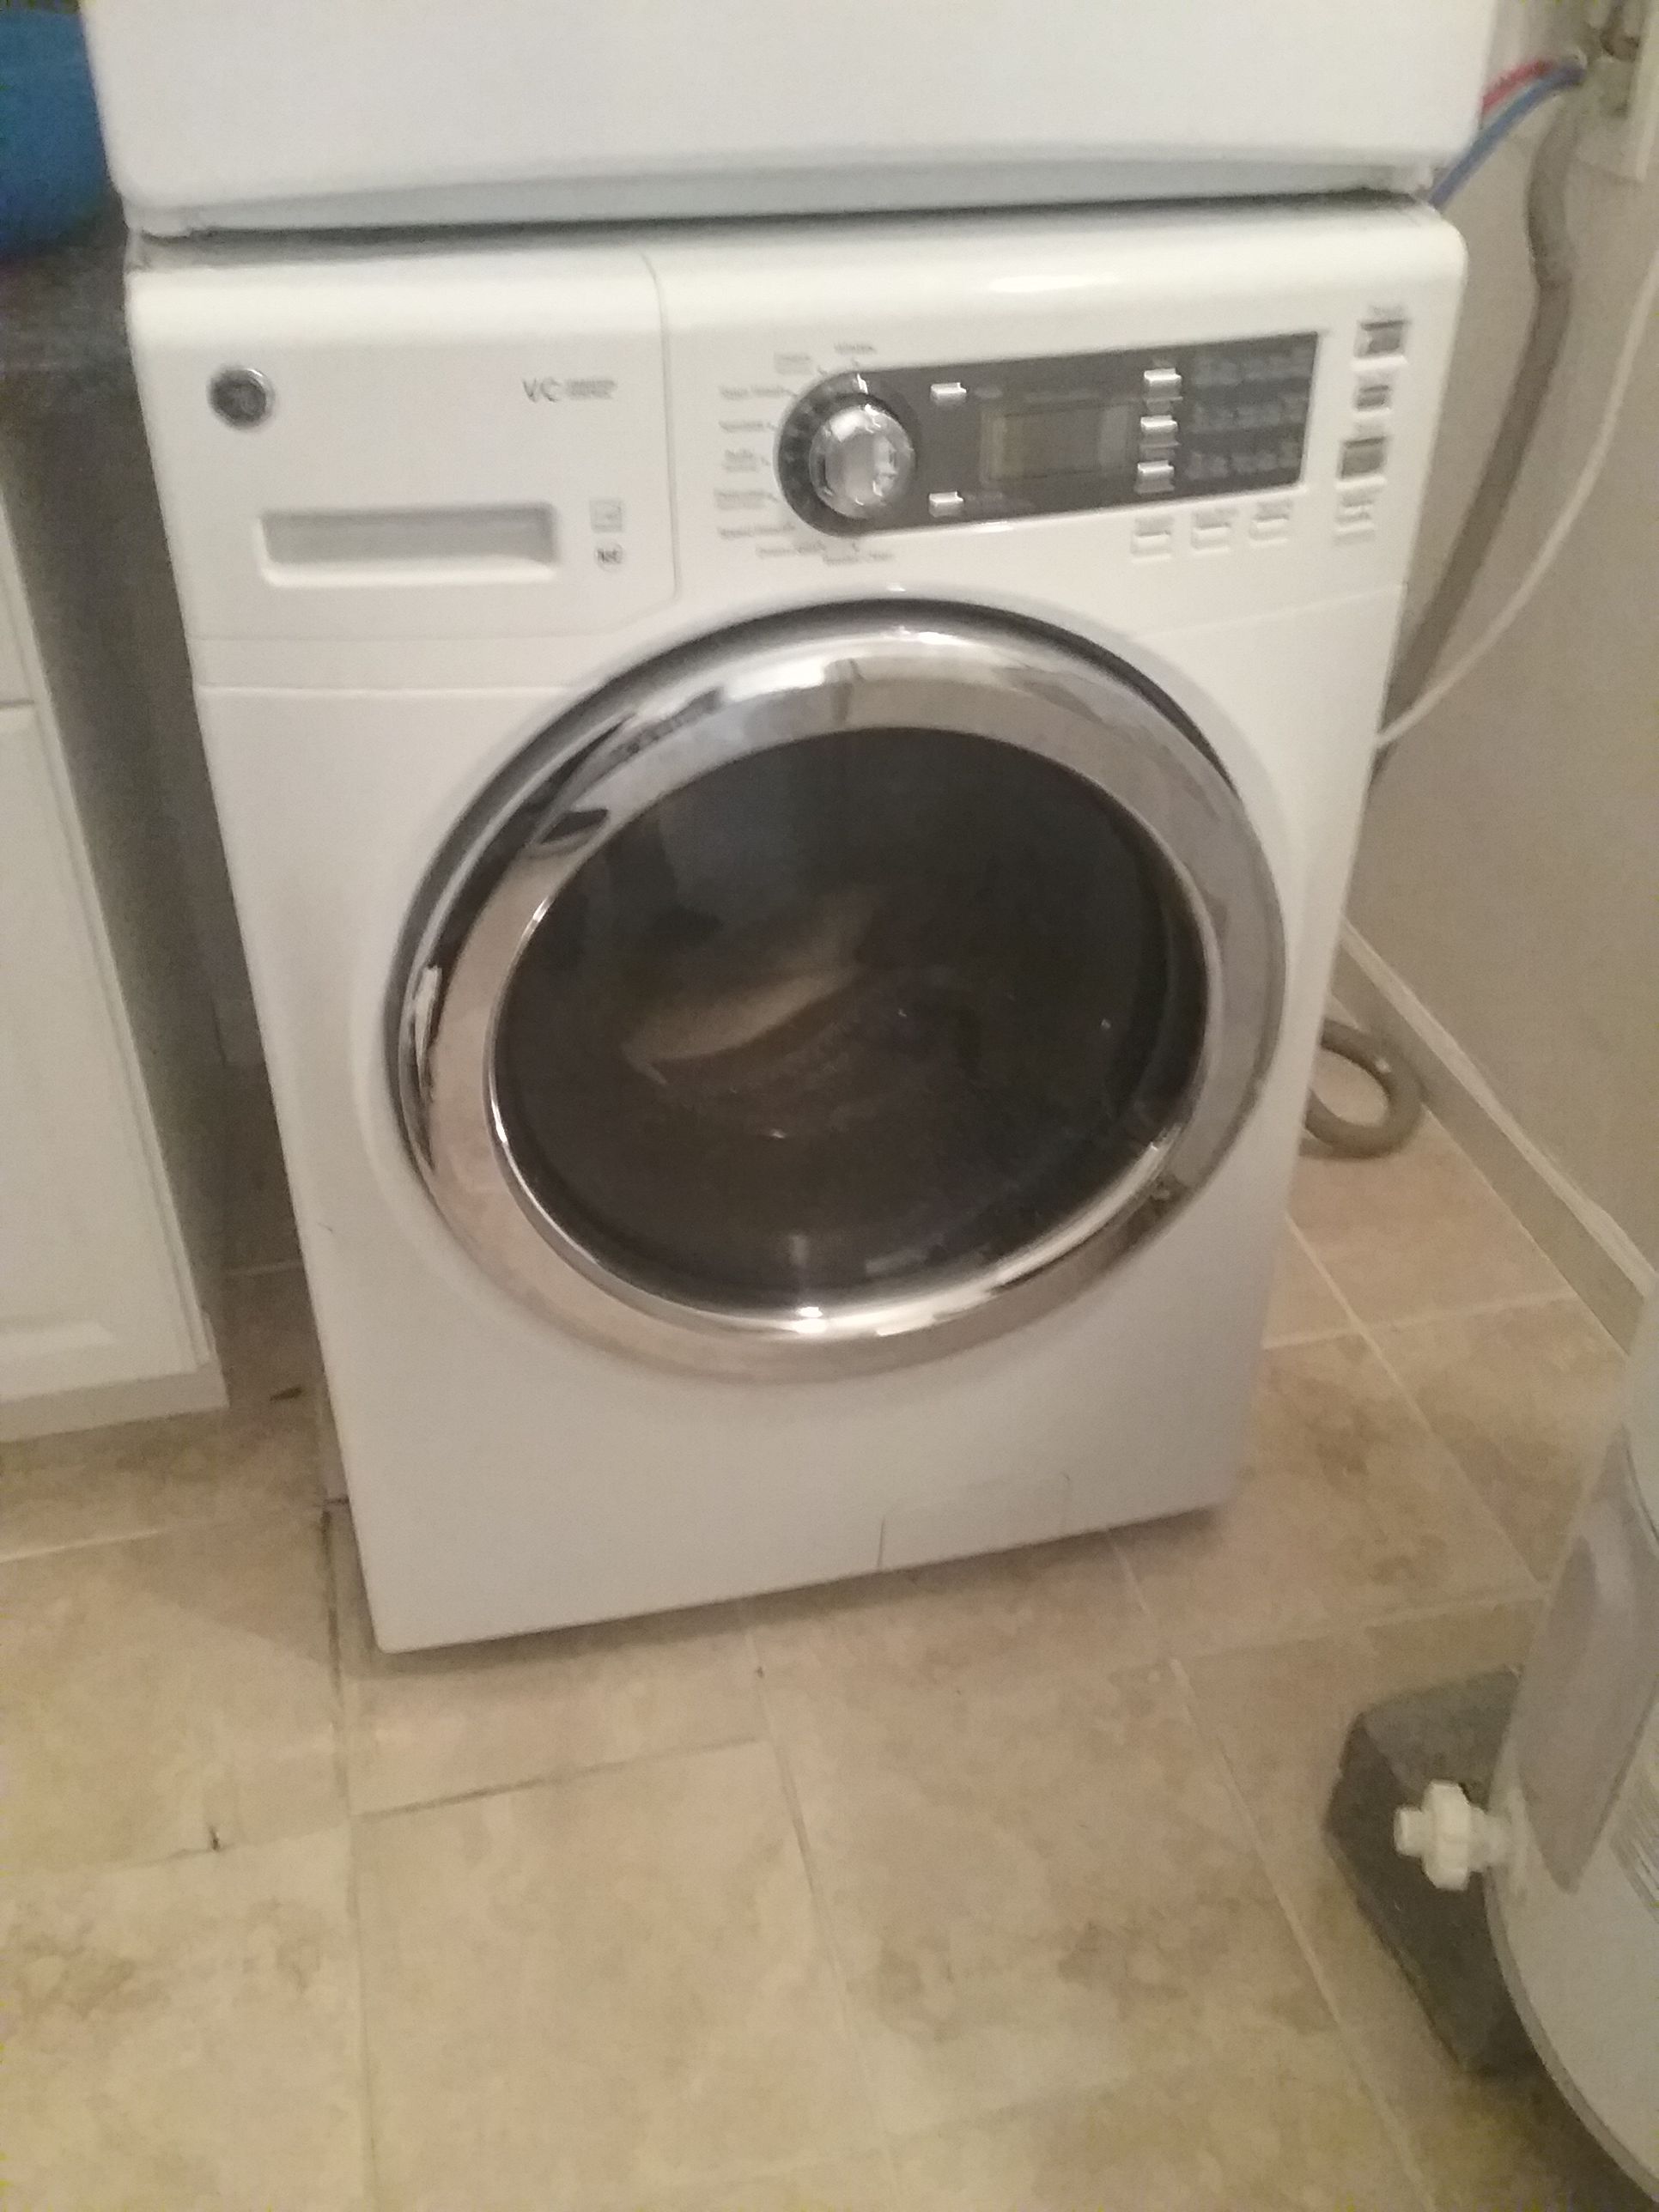 For sale as is washer machine